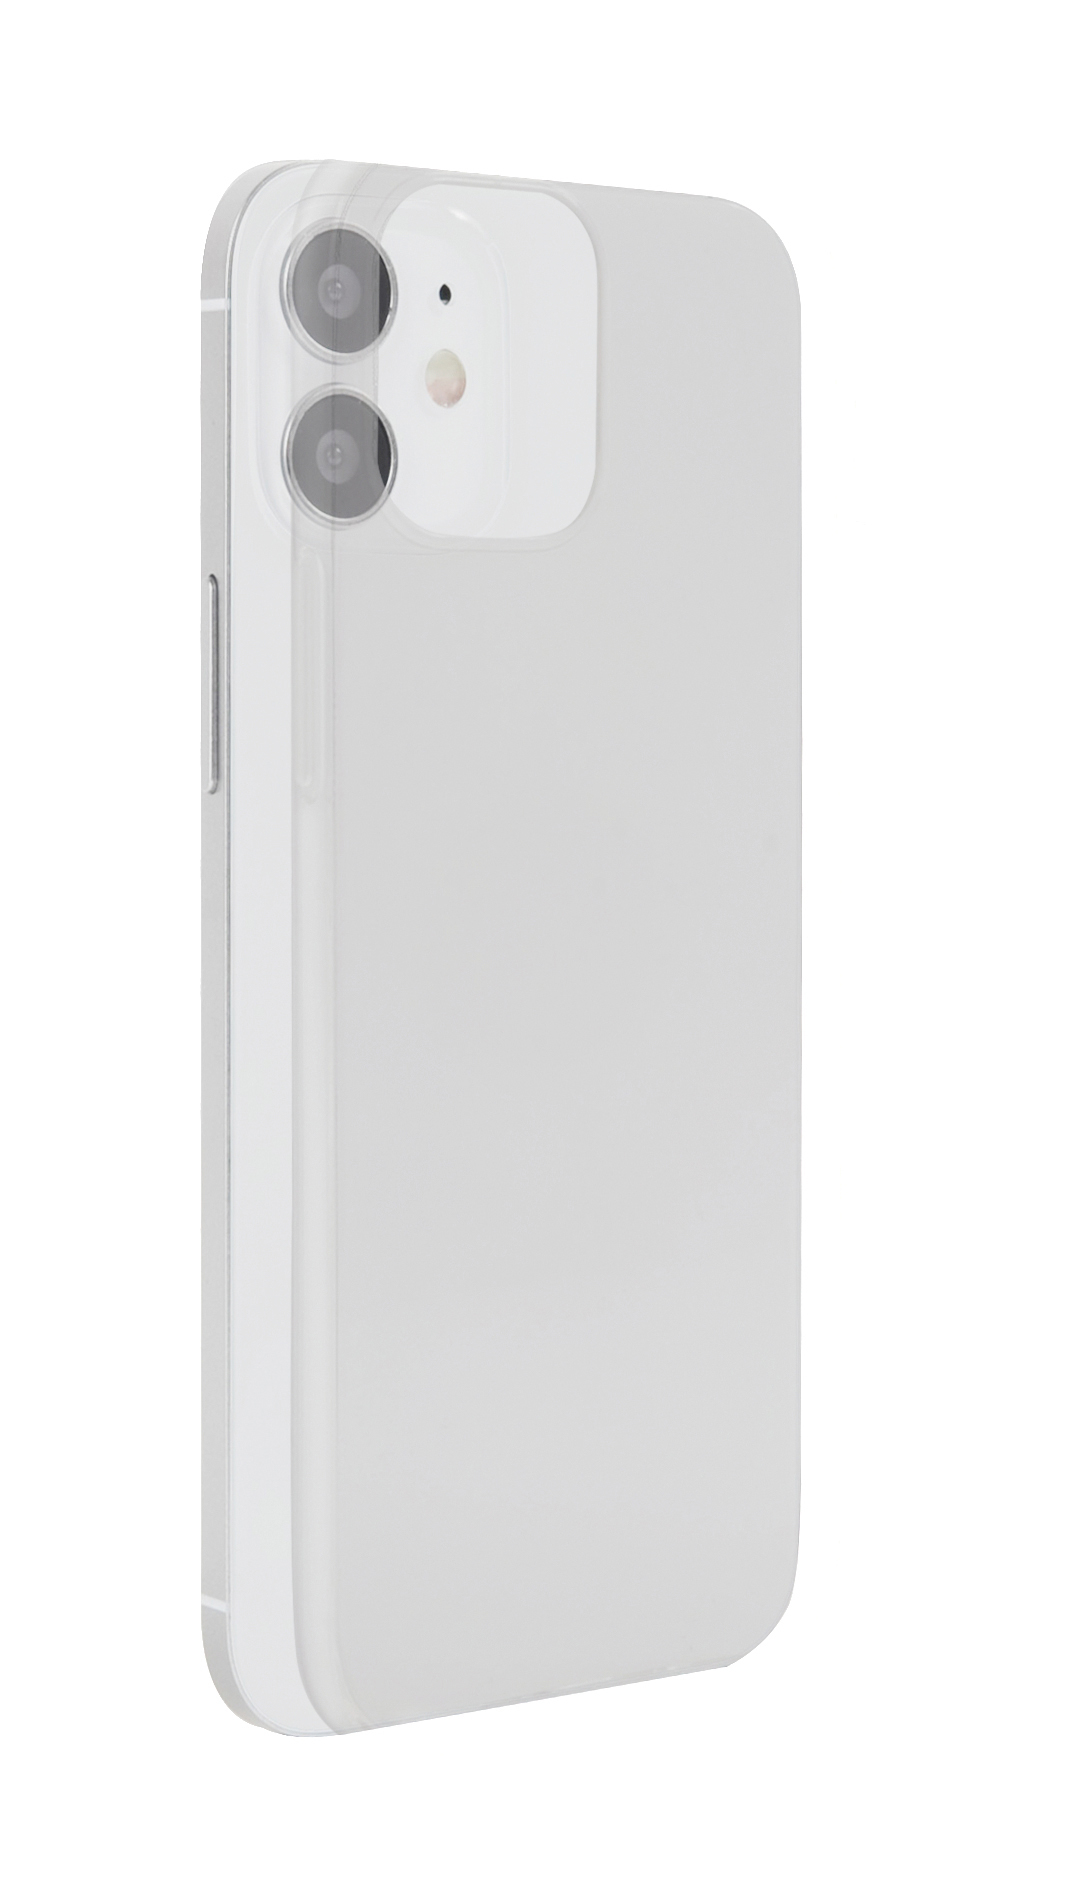 ISY Mini, ISC-1004, Apple, iPhone Transparent 12 Backcover,